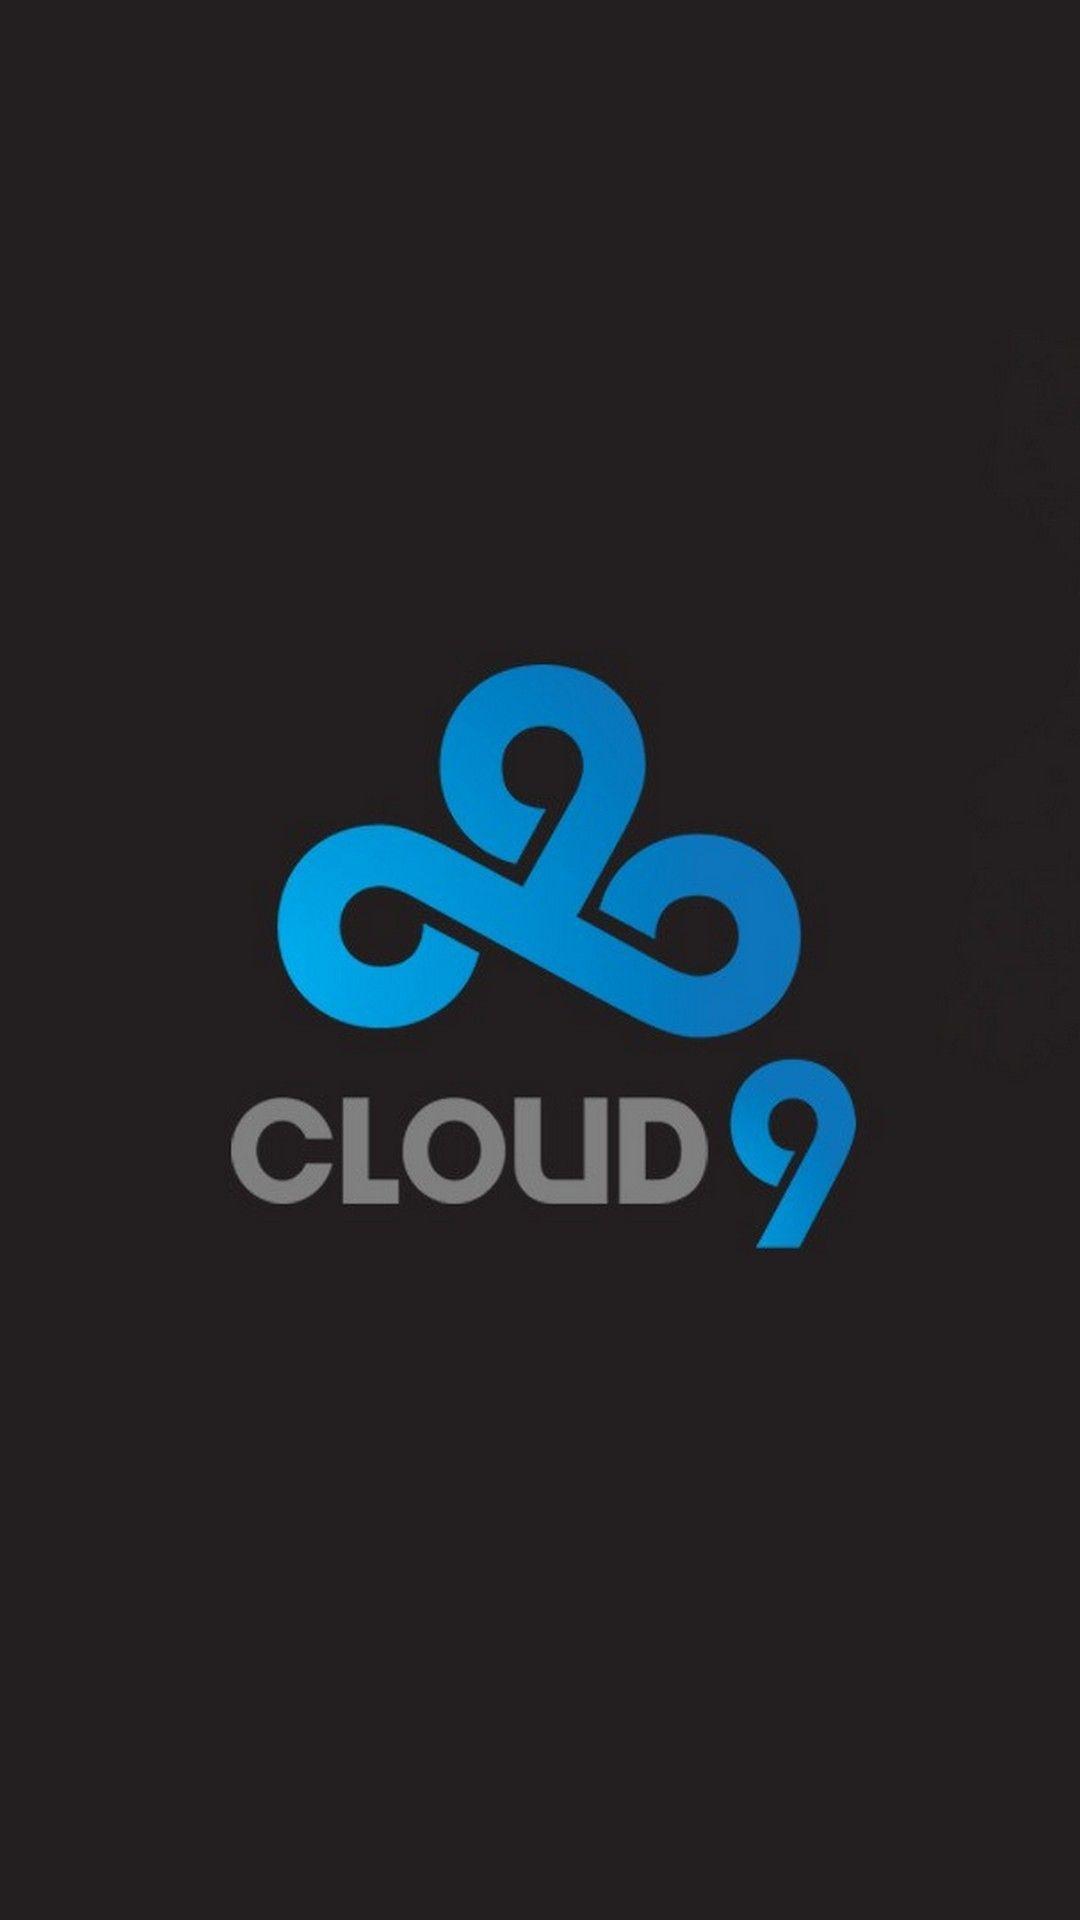 Cloud 9 Games Wallpaper For Android. Game Racing Team